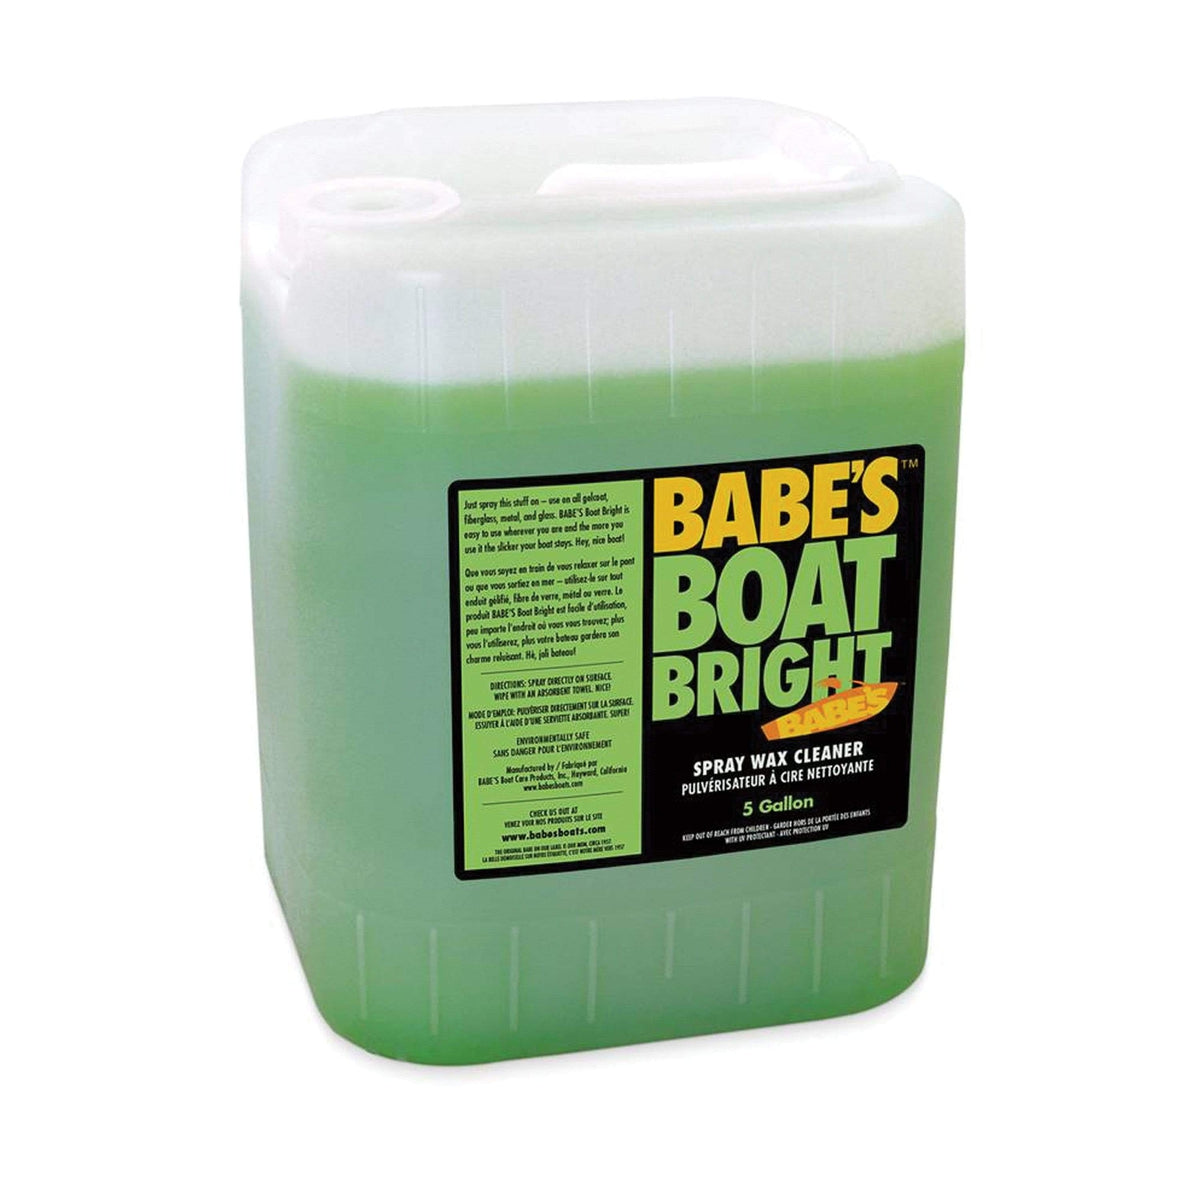 Babes Boat Care Products Not Qualified for Free Shipping Babe's Boat Bright 5-Gallon #BB7005